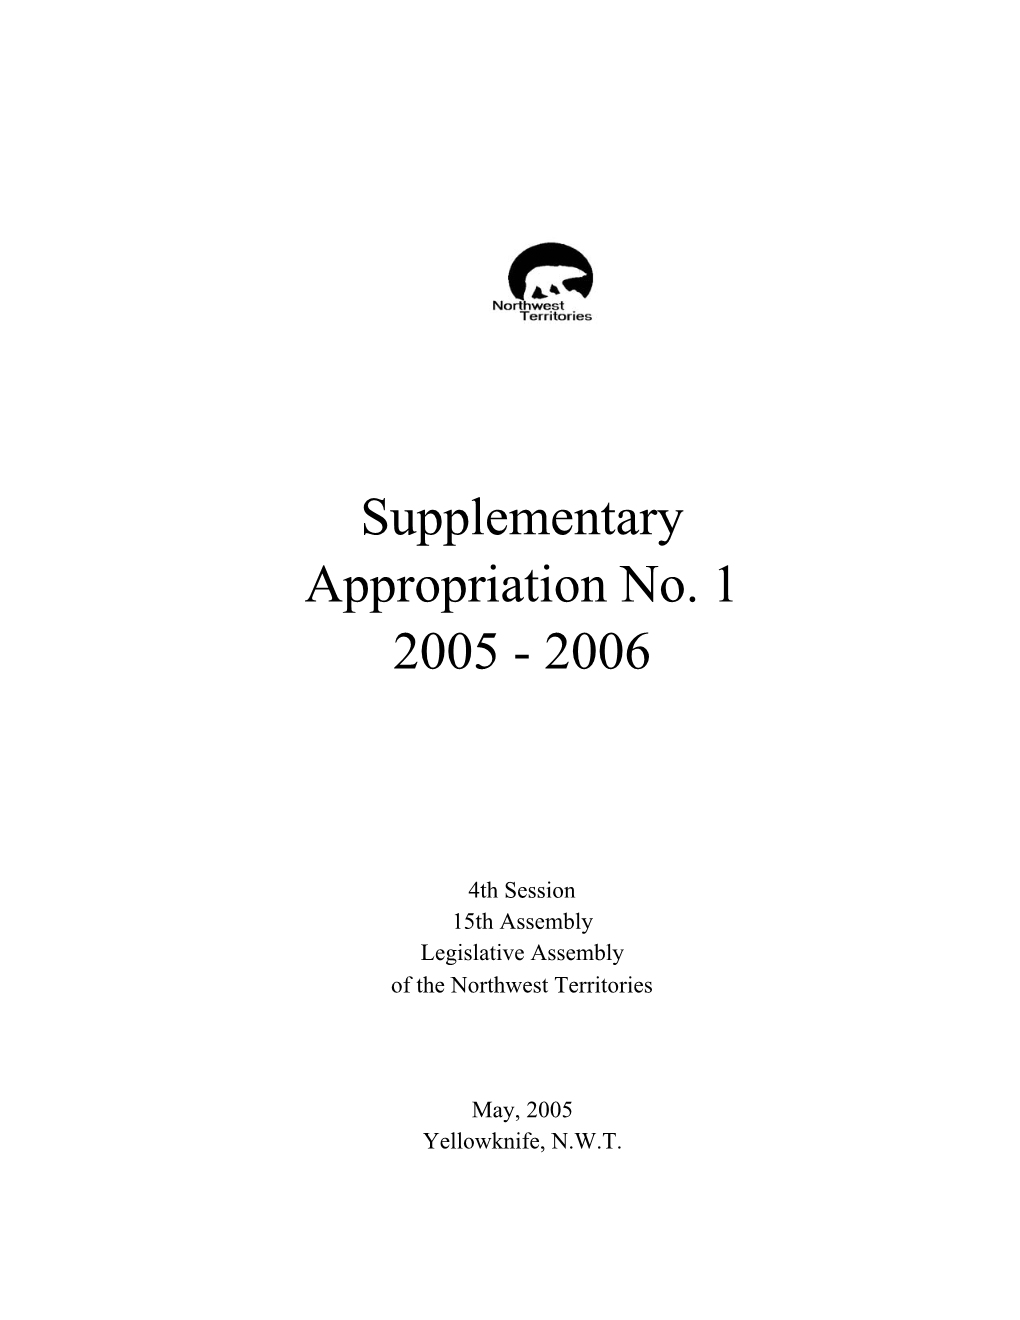 2005-2006 Supplementary Appropriation #1